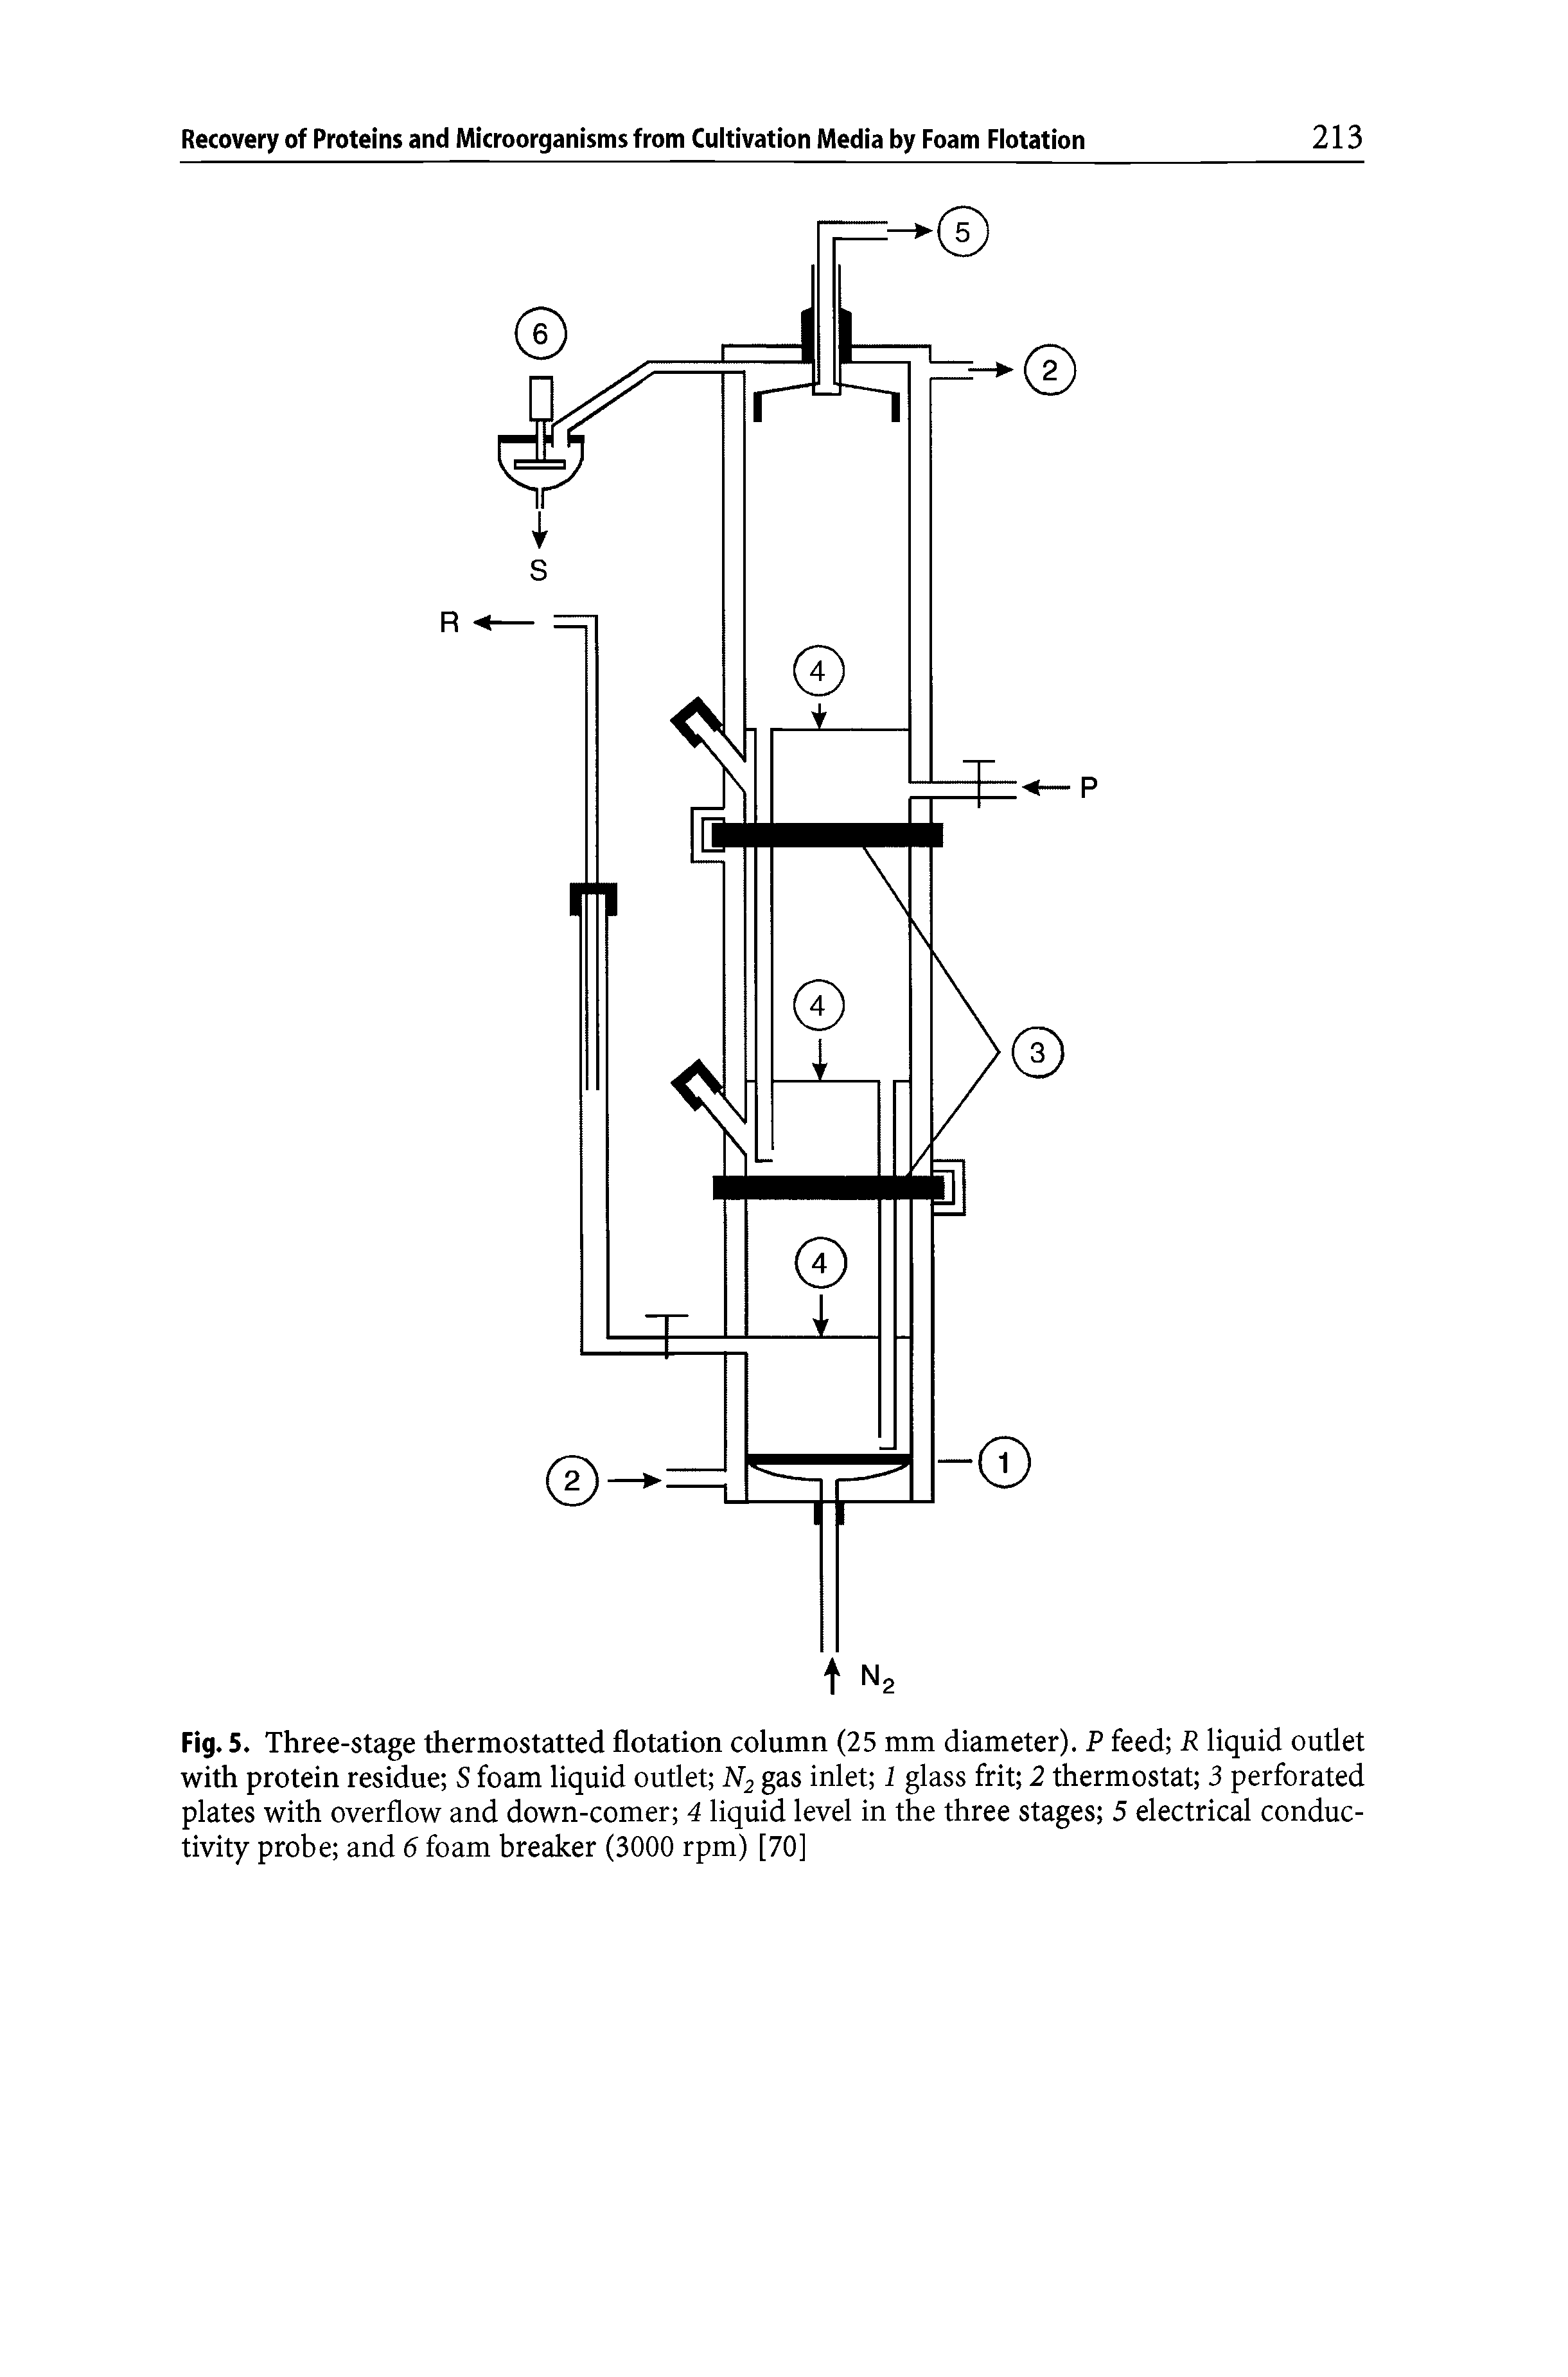 Fig. 5. Three-stage thermostatted flotation column (25 mm diameter). P feed R liquid outlet with protein residue S foam liquid outlet gas inlet 1 glass frit 2 thermostat 3 perforated plates with overflow and down-comer 4 liquid level in the three stages 5 electrical conductivity probe and 6 foam breaker (3000 rpm) [70]...